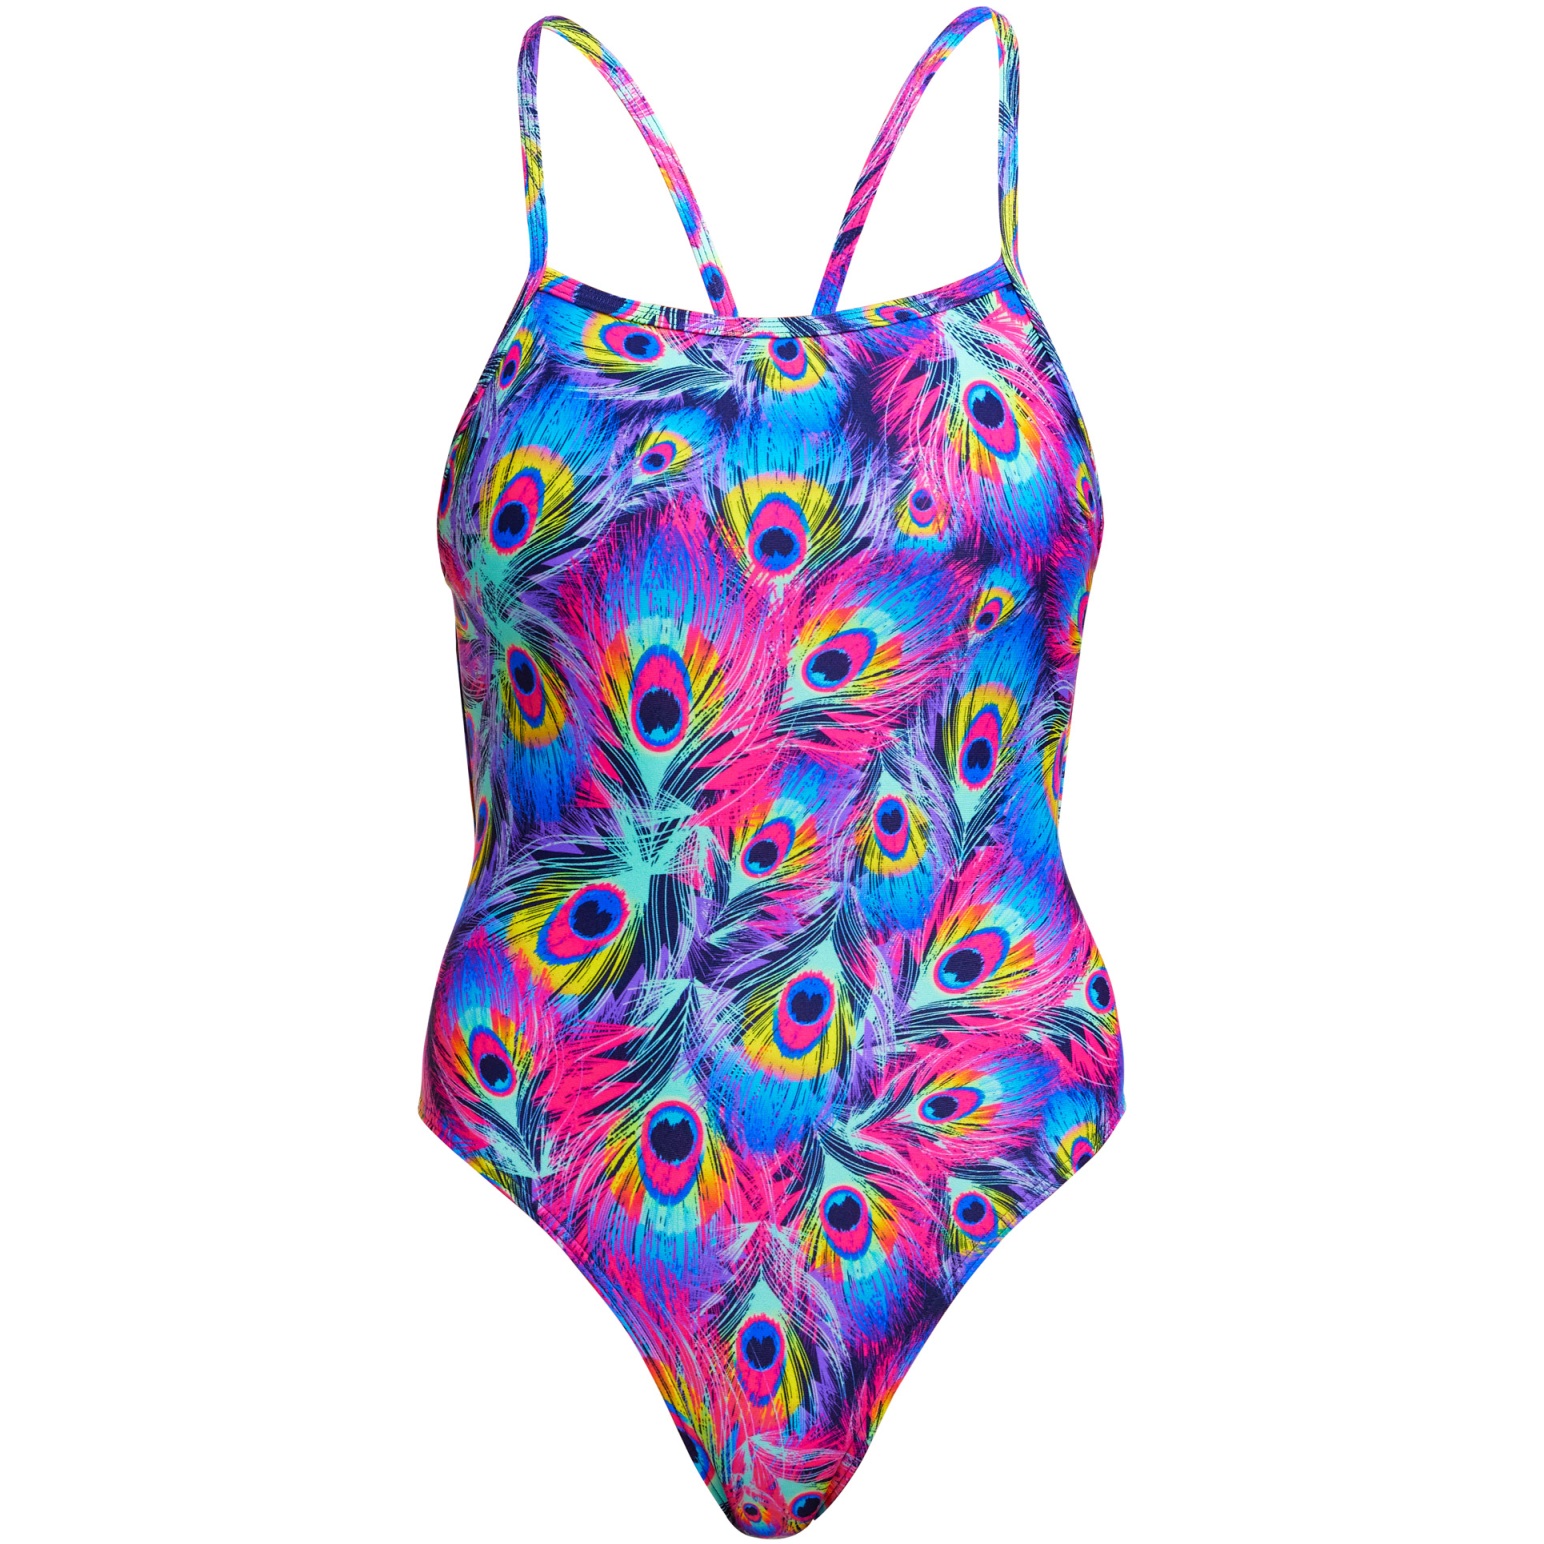 Picture of Funkita Single Strength One Piece Swimsuit Women - Peacock Paradise